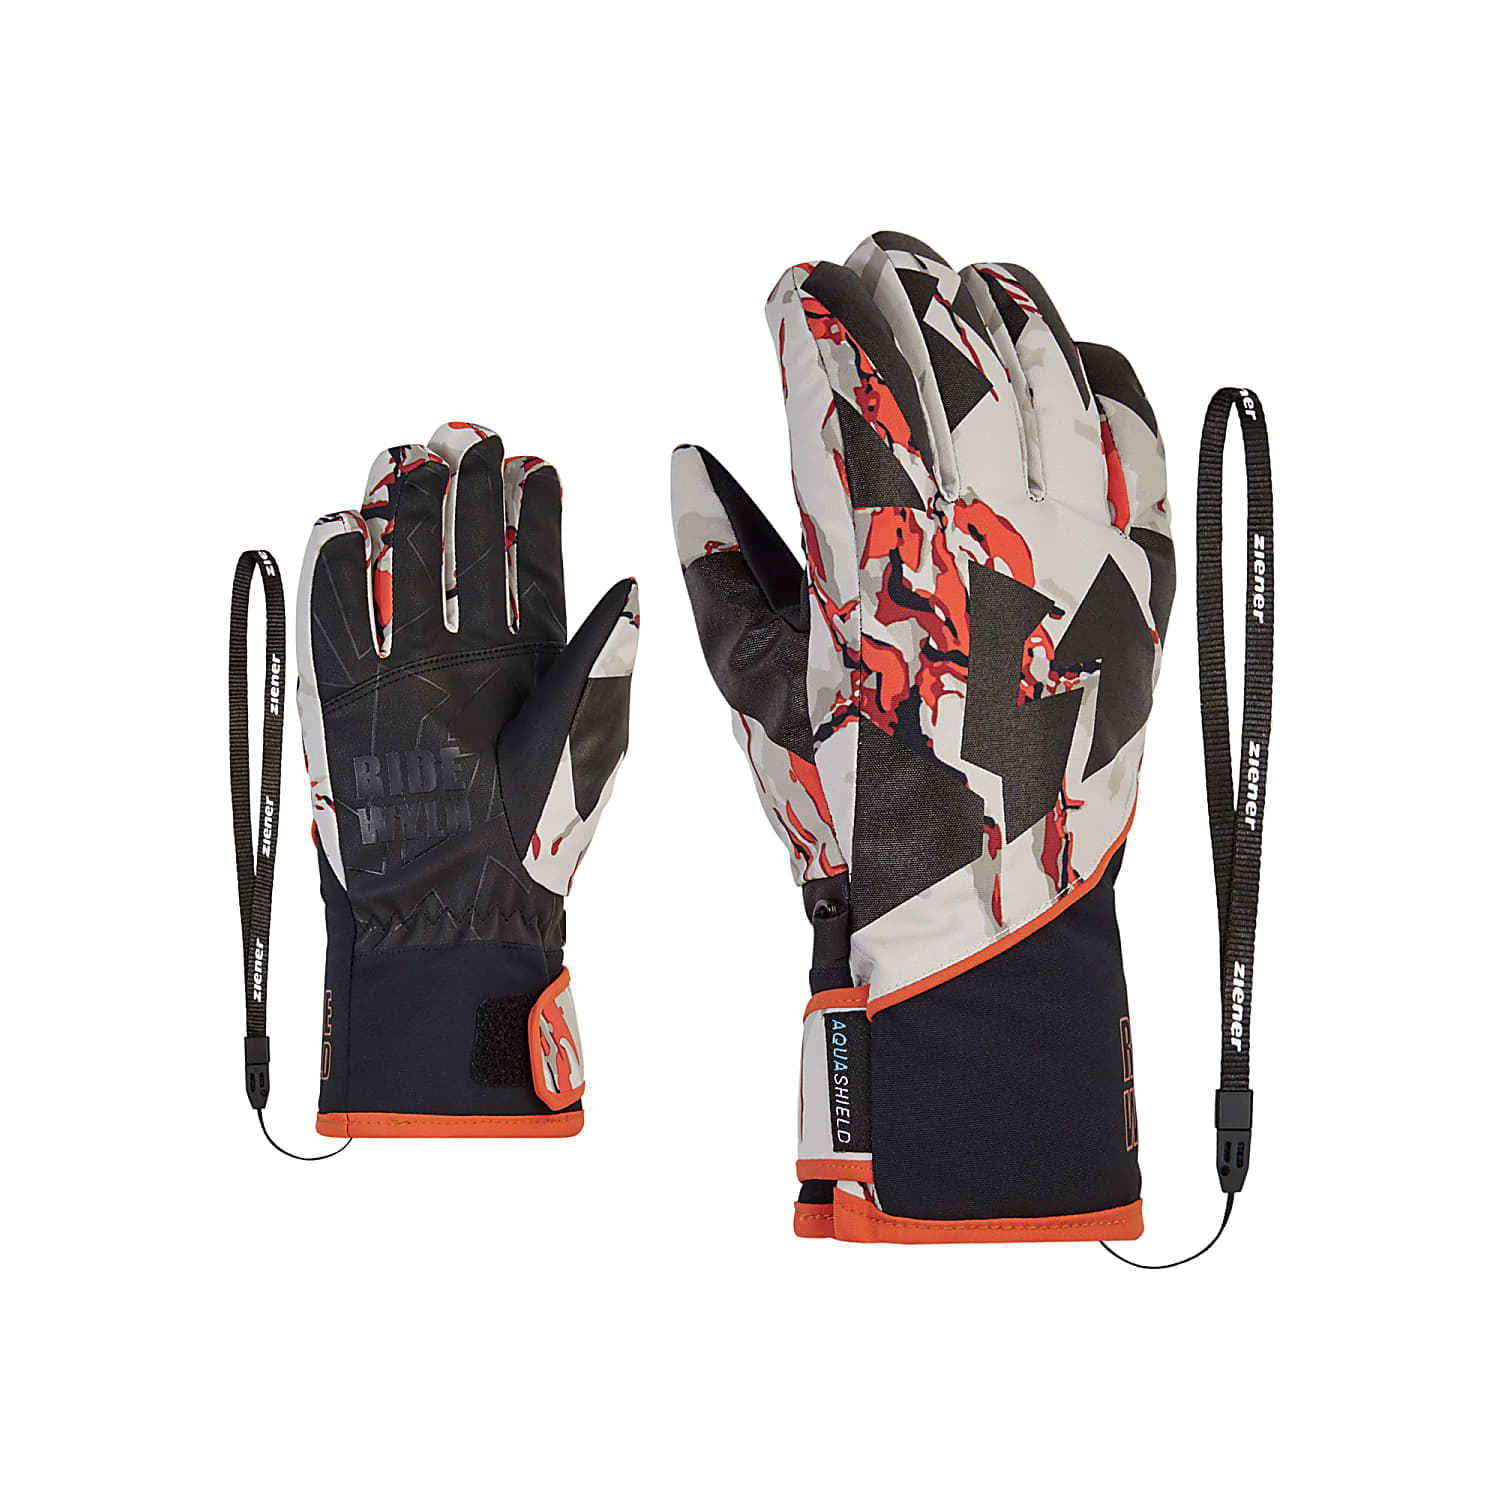 AS cheap JUNIOR AW Print LIWO GLOVE, shipping Ziener - Cliff Fast and